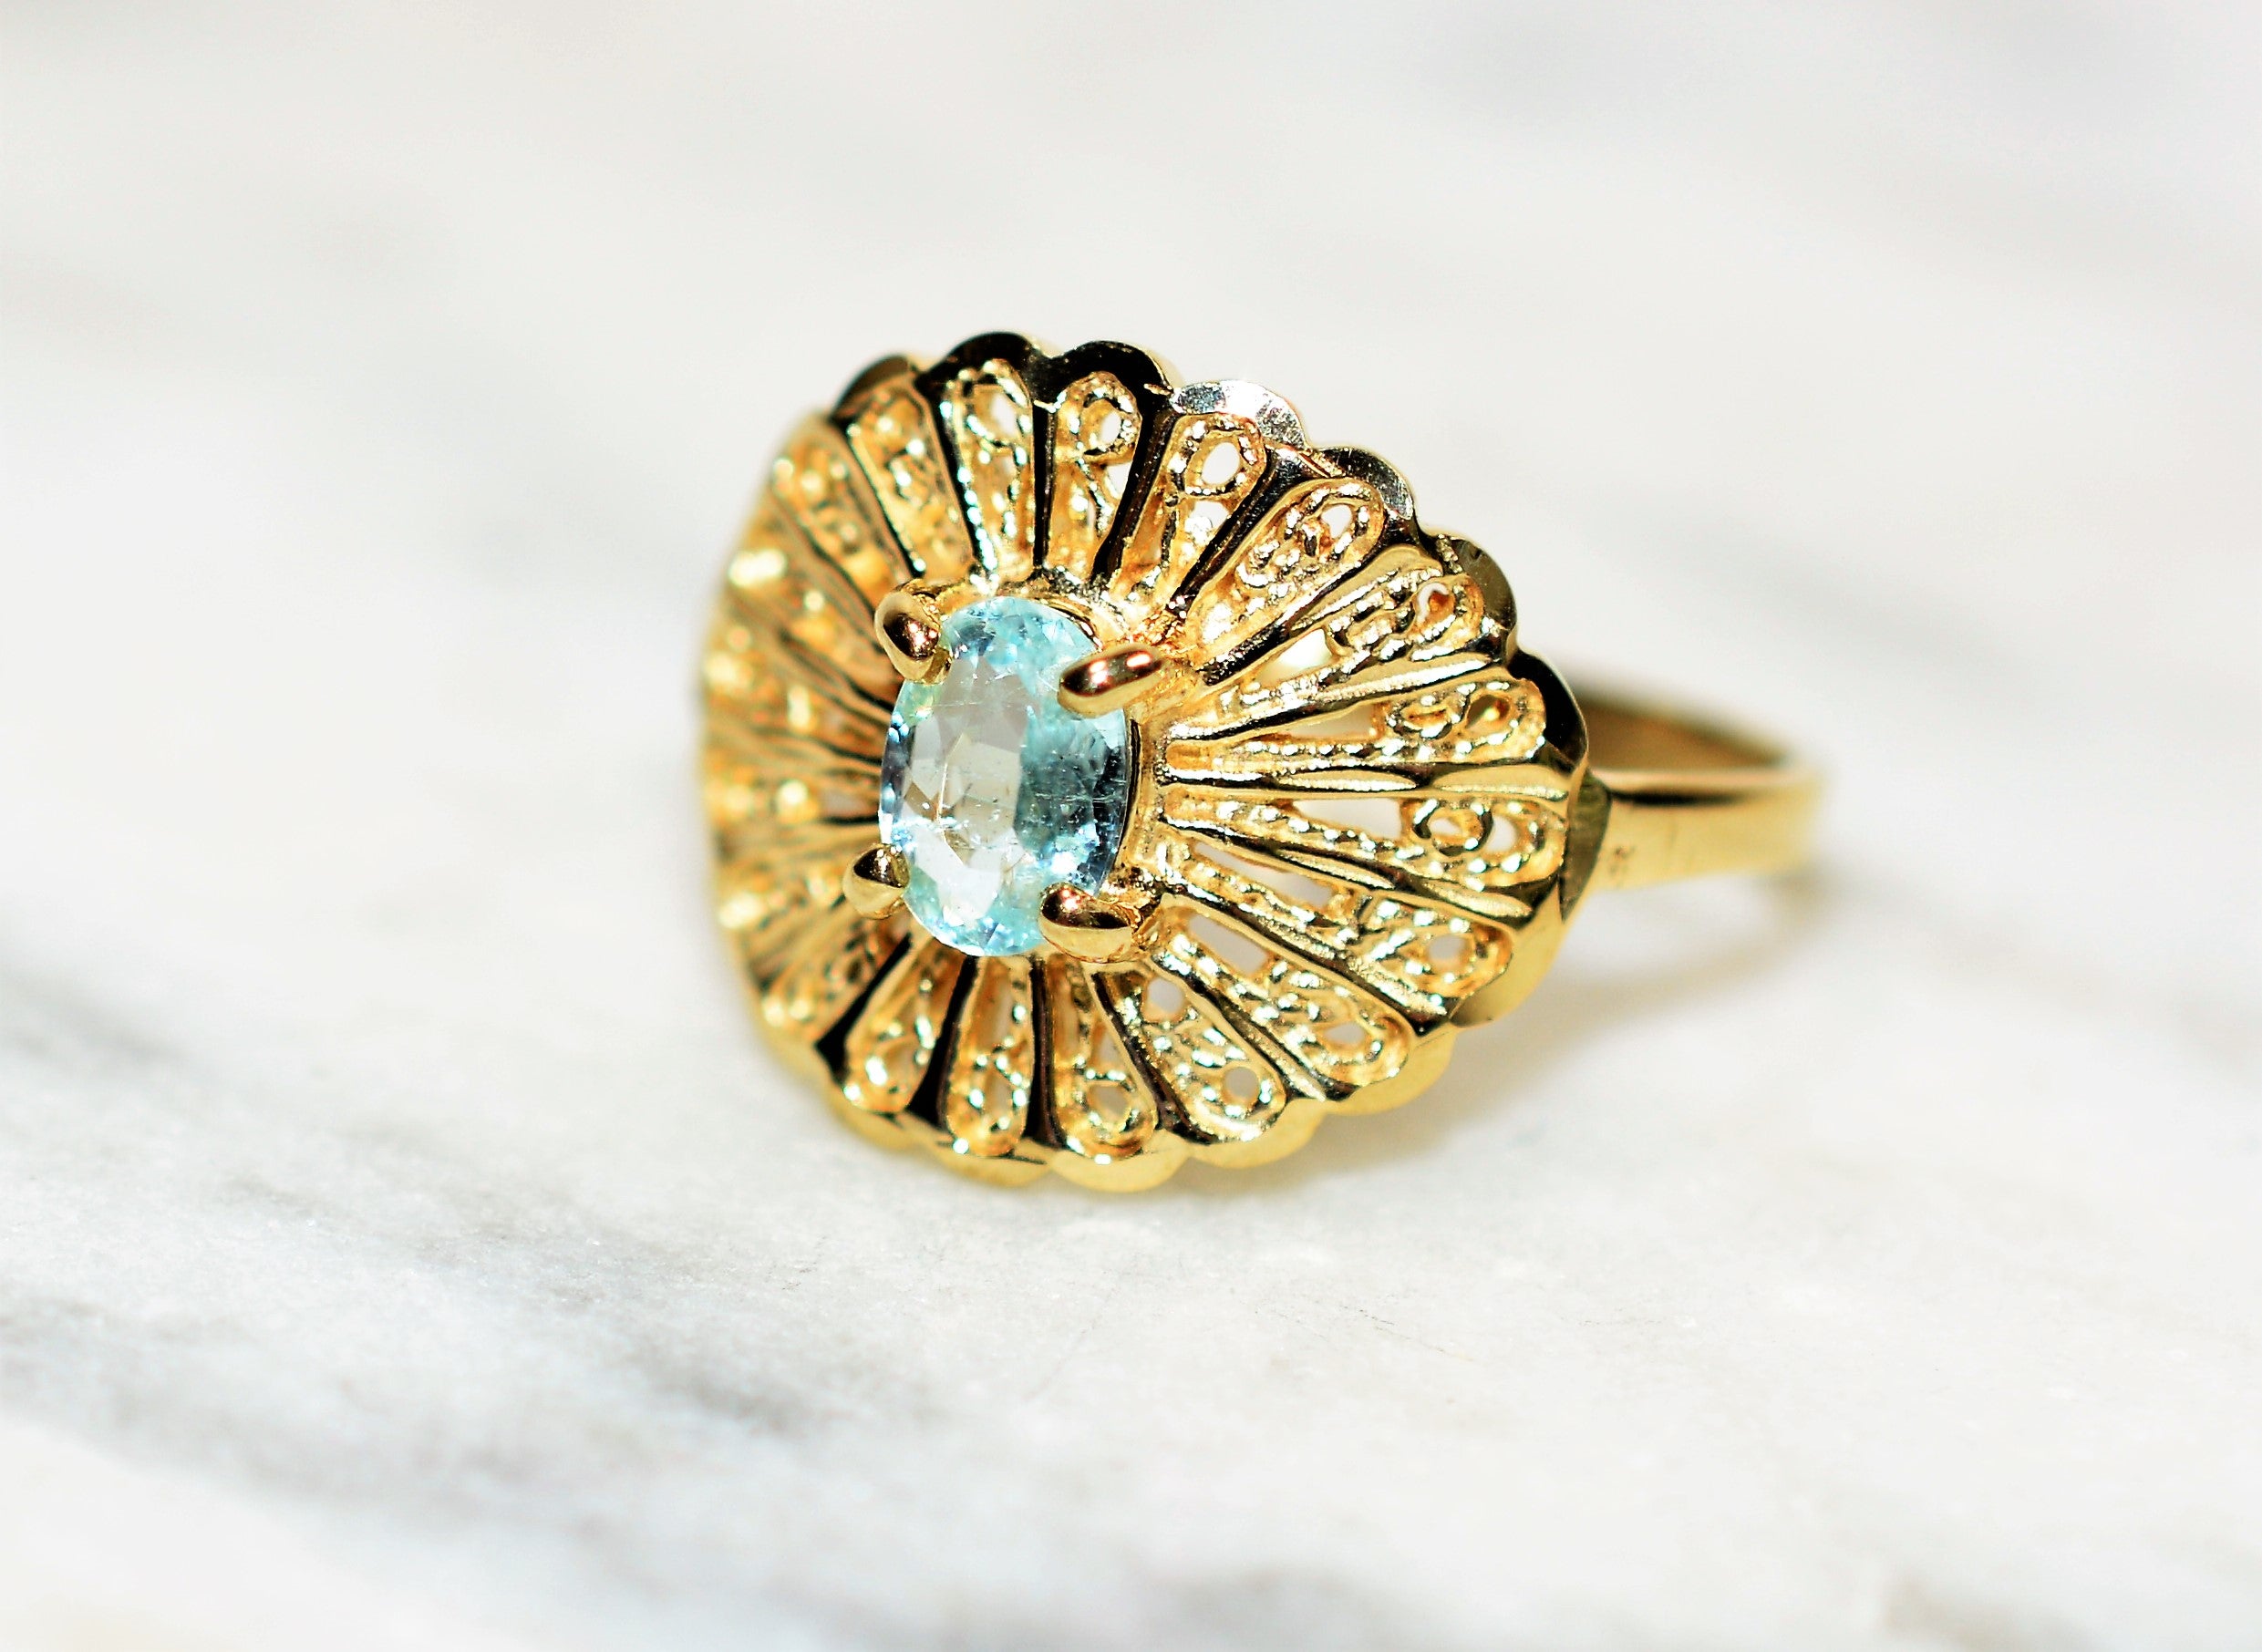 Natural Paraiba Tourmaline Ring 10K Solid Gold .38ct Solitaire Gemstone Saucer Ring Ballerina Ring Women's Ring Birthstone Jewelry Jewellery